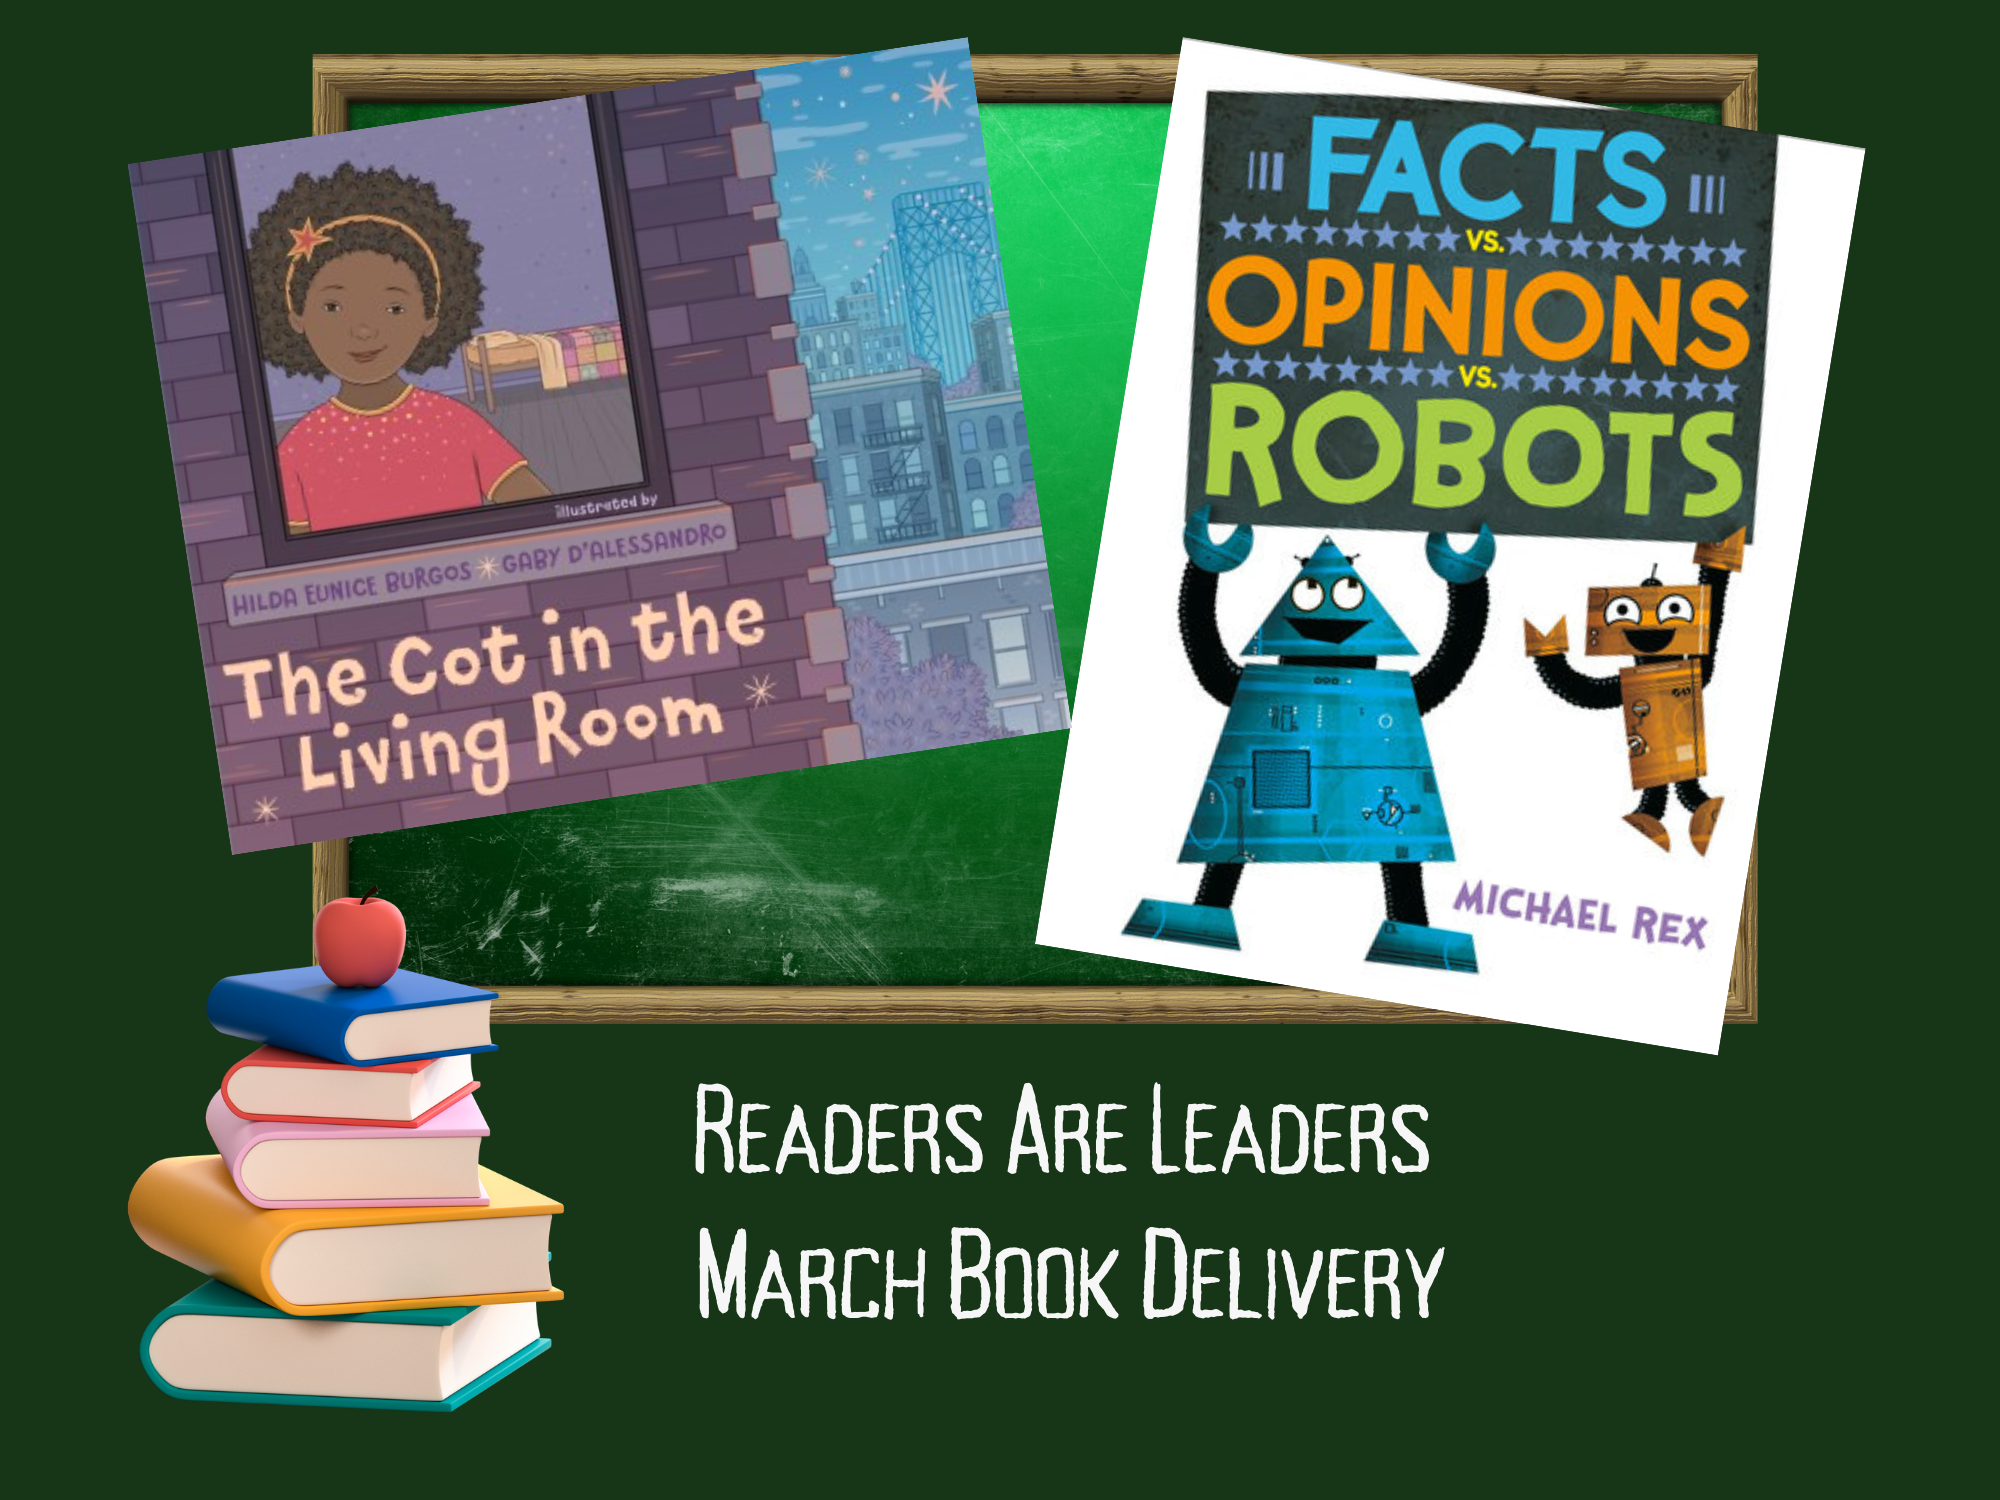 Readers Are Leaders Distributed The Cot in the Living Room and Facts vs Opinions vs Robots to classrooms in March